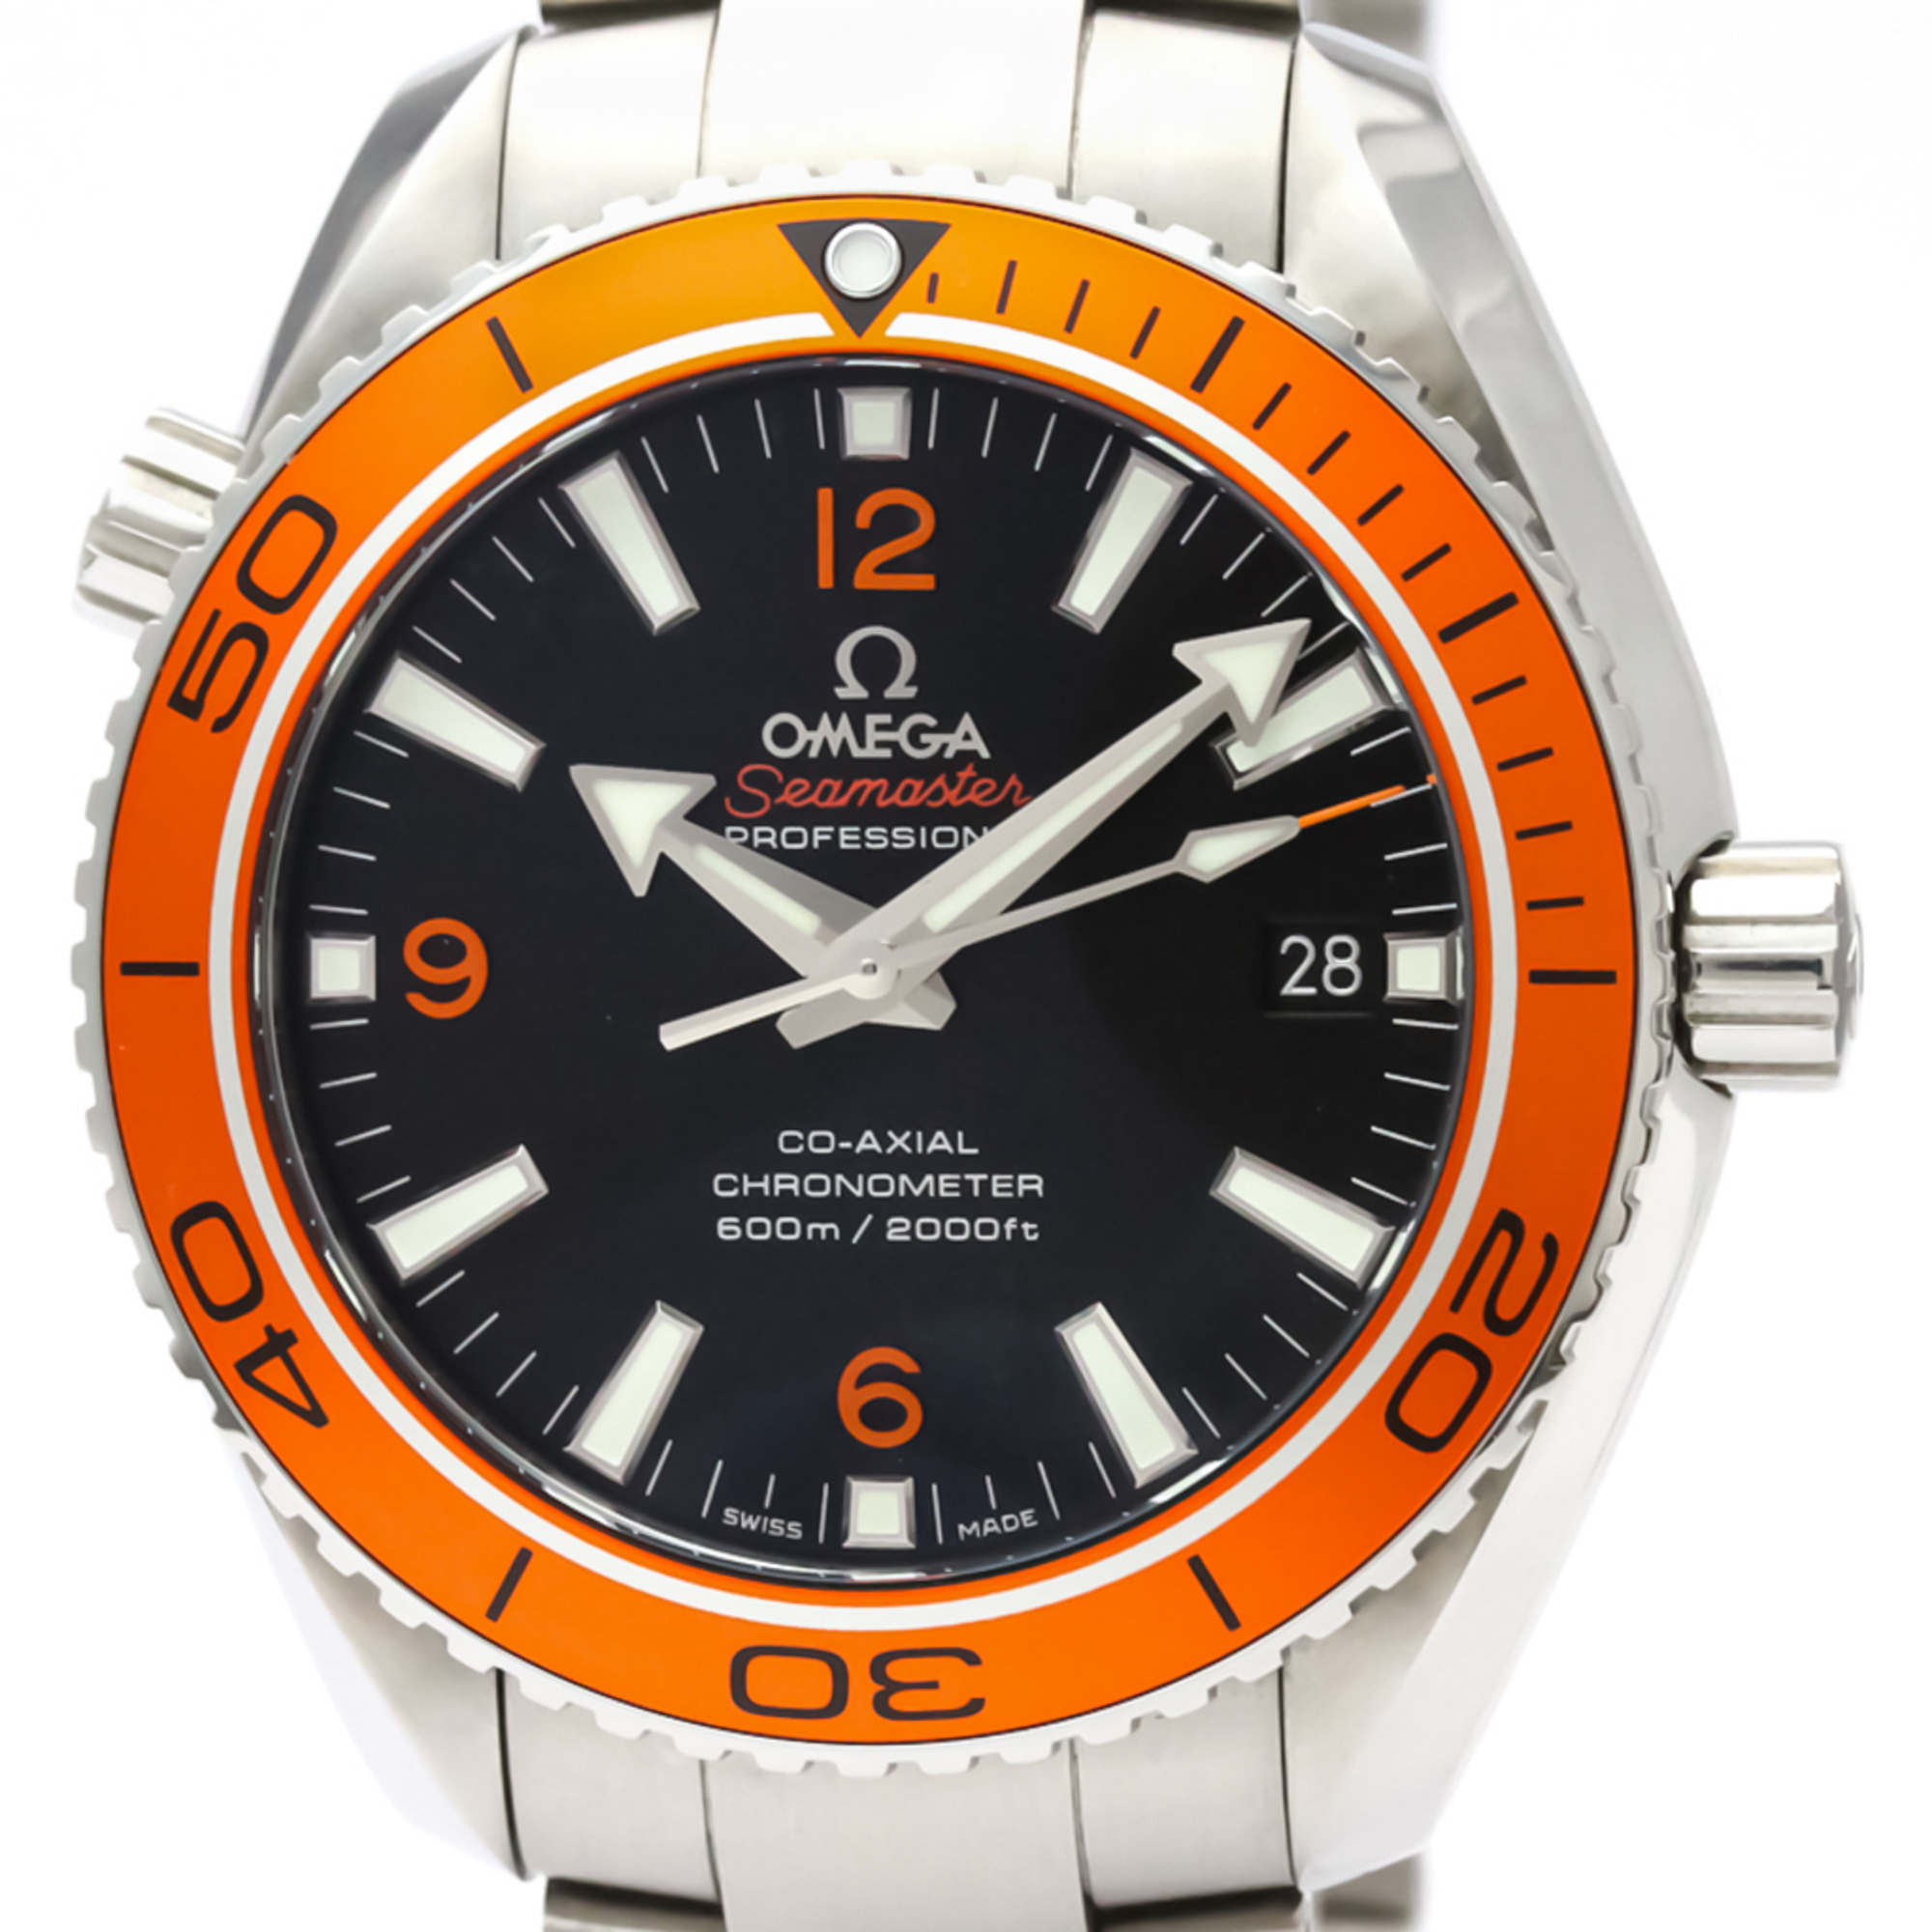 Omega Seamaster Automatic Stainless Steel Men's Sports Watch 232.30.42.21.01.002